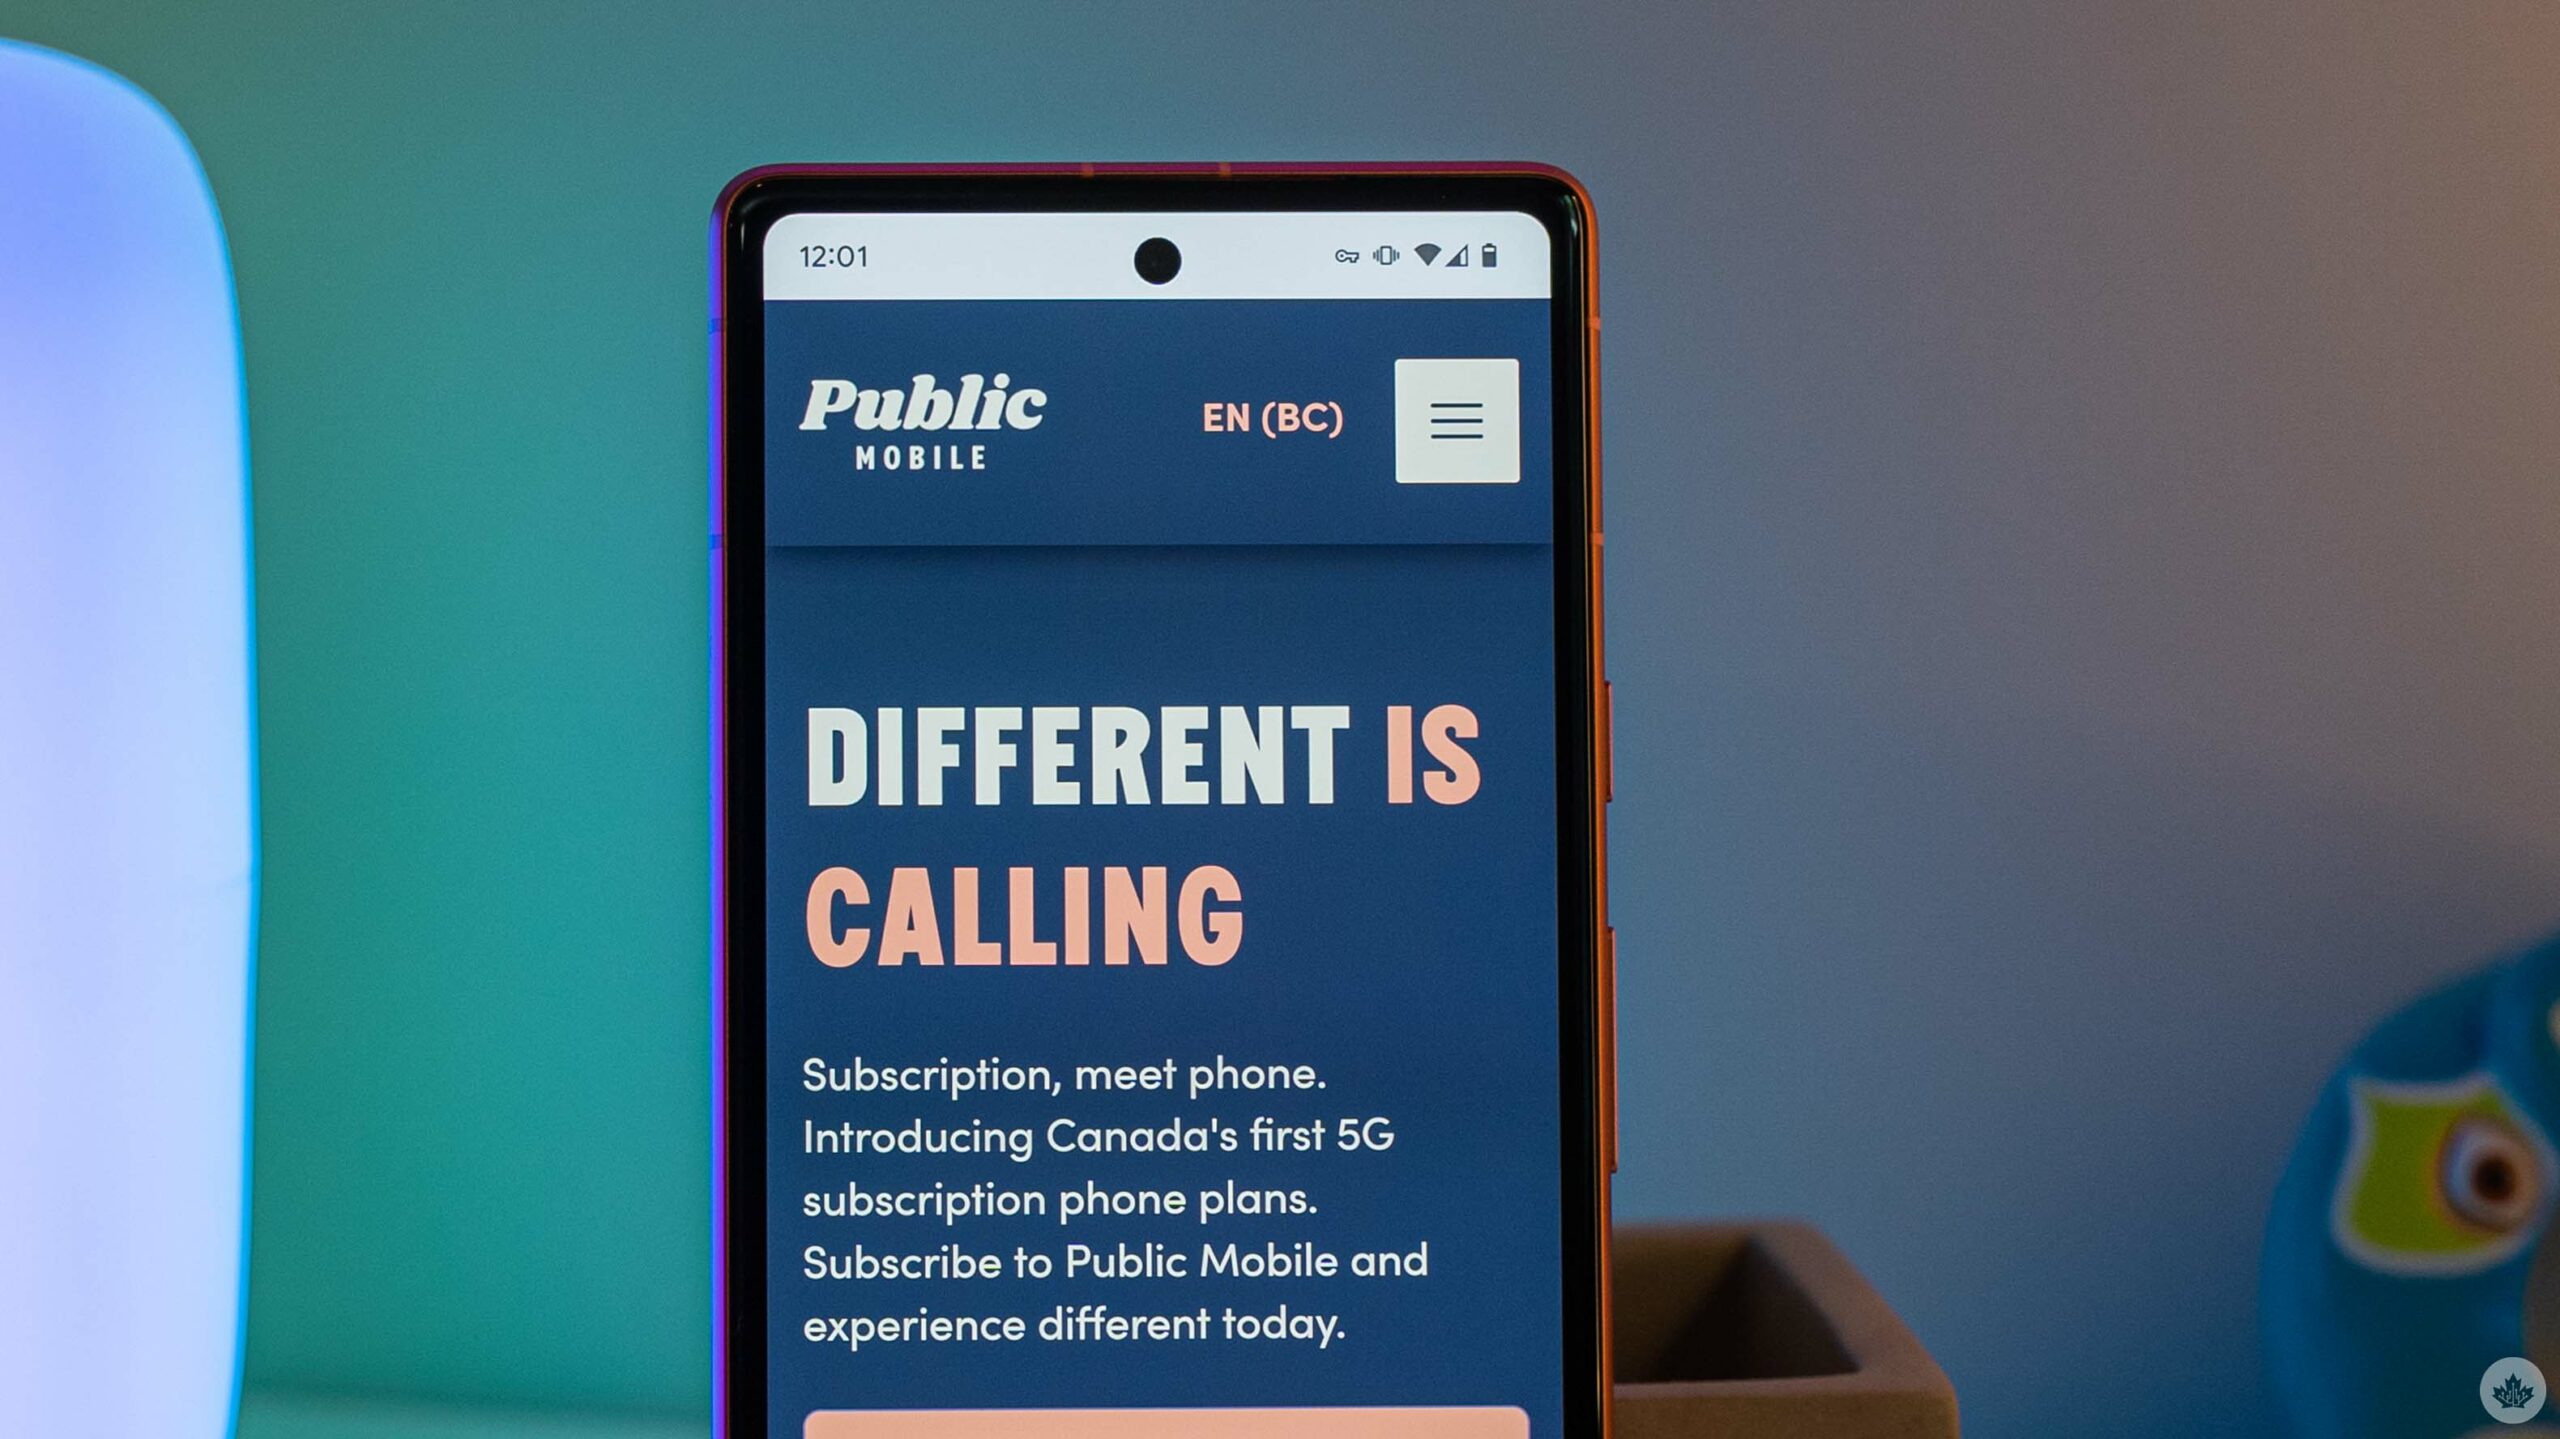 Public Mobile website on a phone.